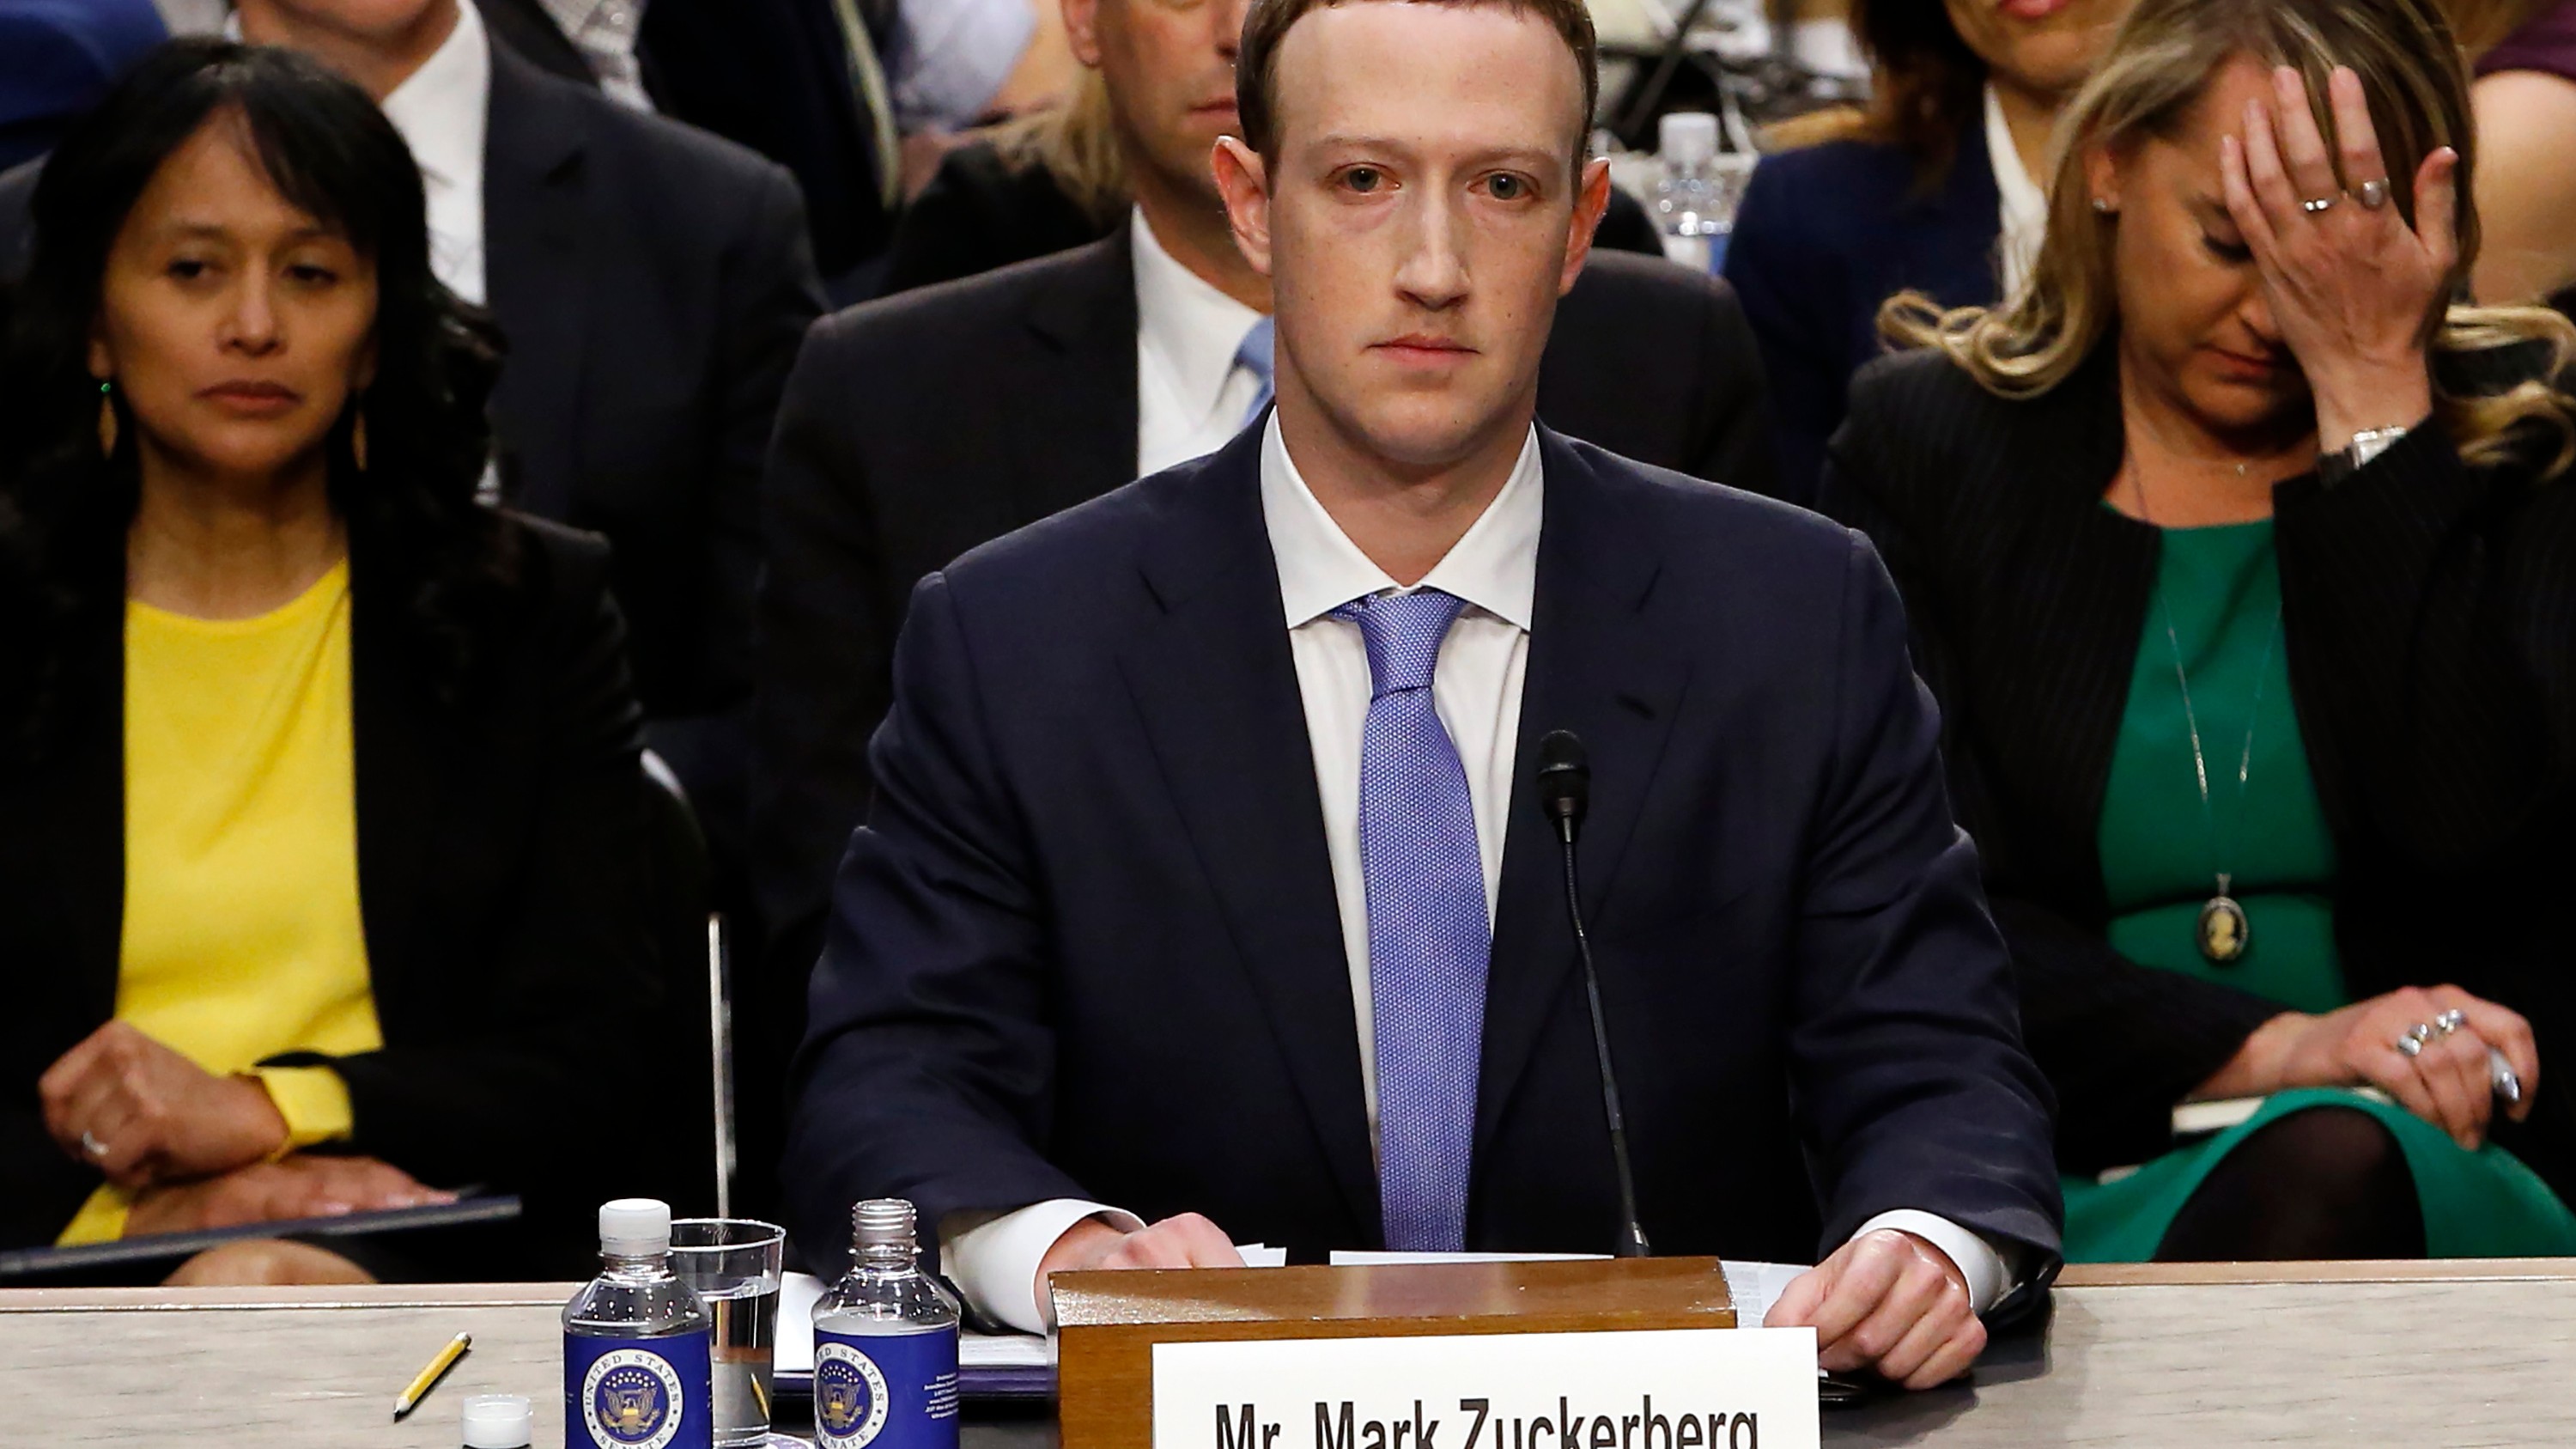 Facebook CEO Mark Zuckerberg returns to Capital Hill on Wednesday for his second day of testimony in front of Congress